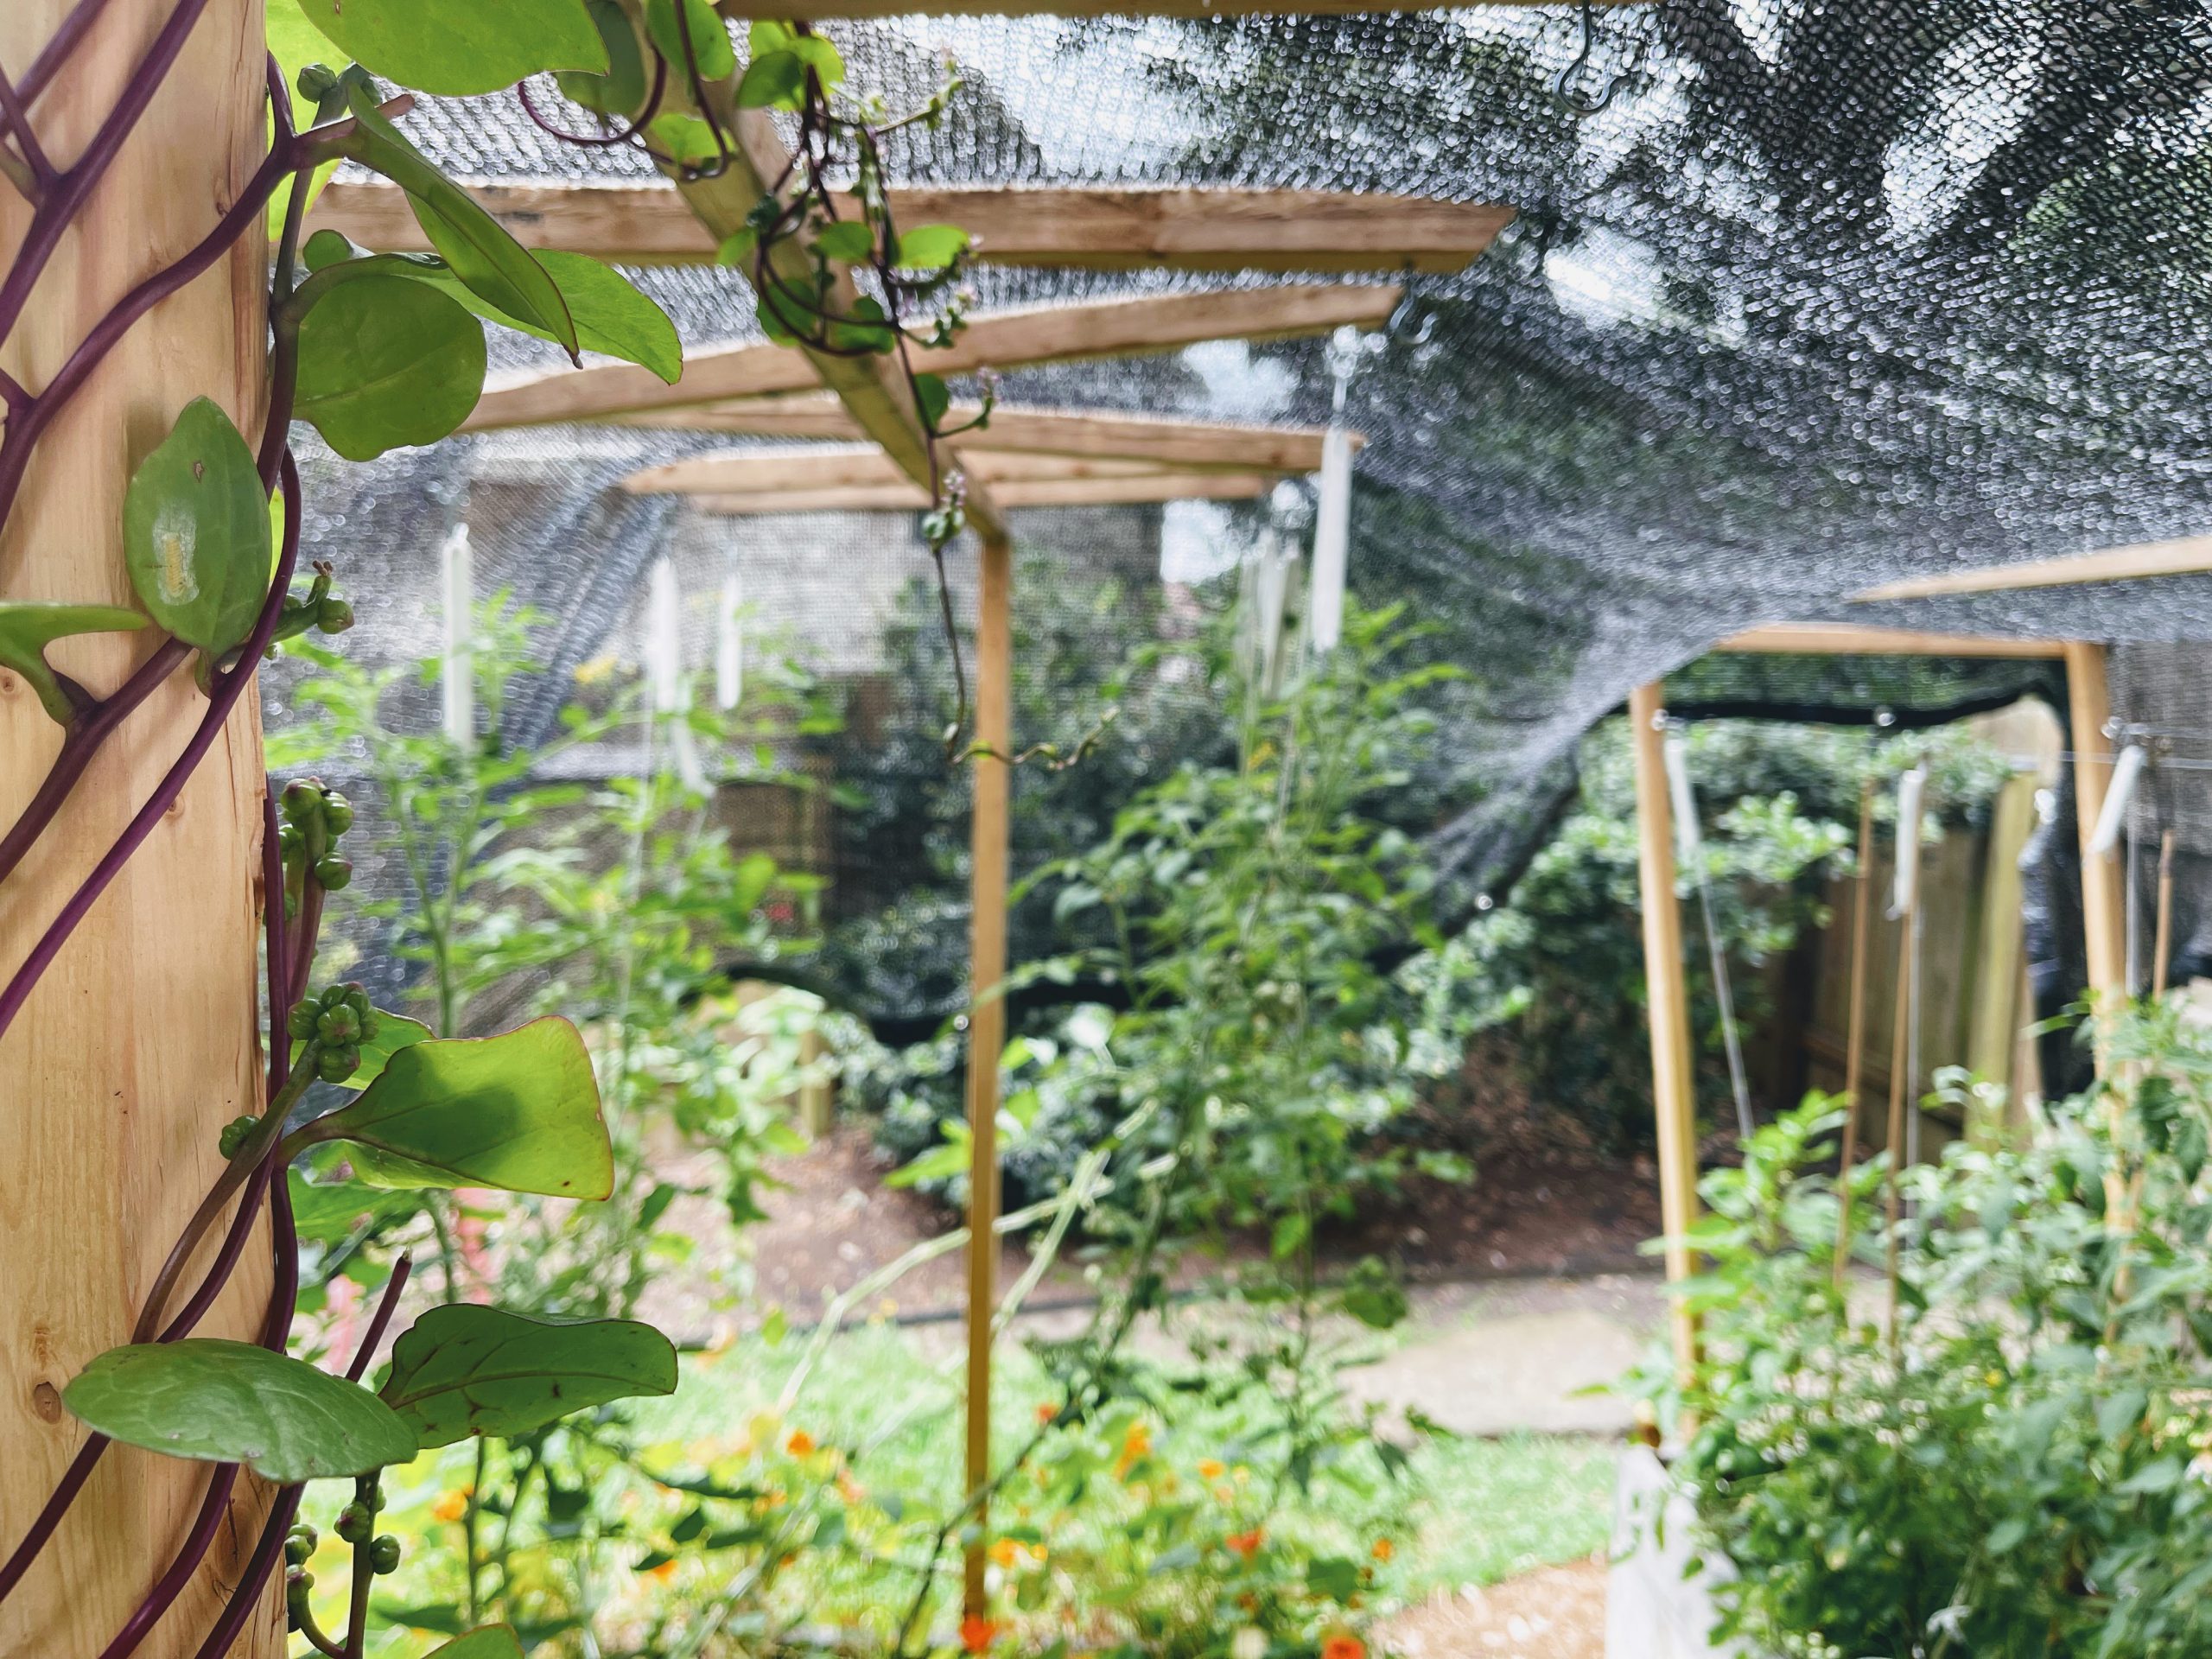 A view of tomato trellises underneath a shade cloth.